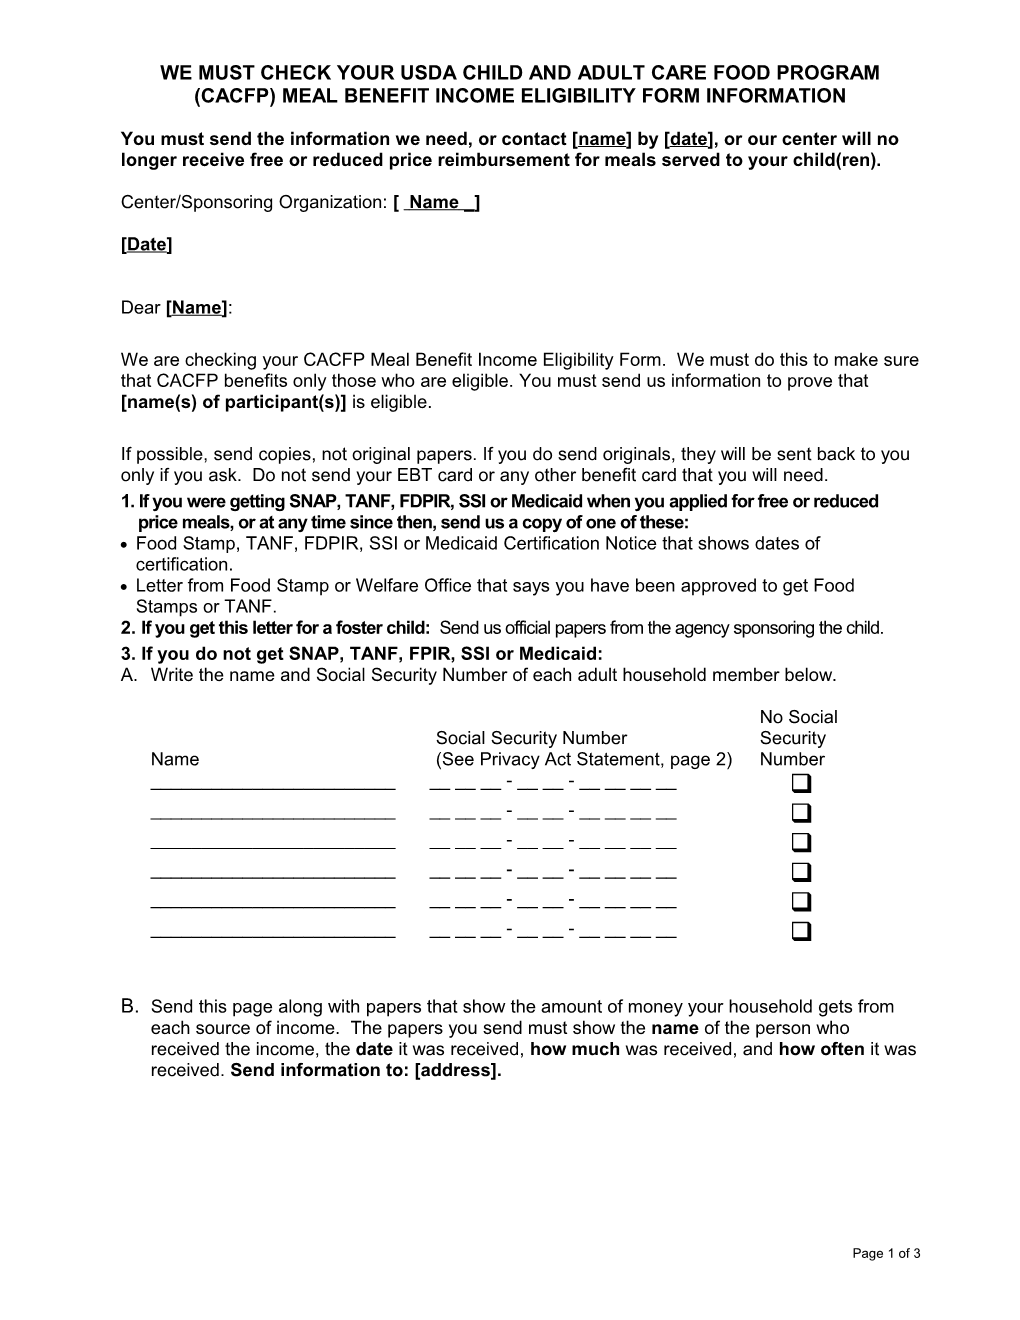 CACFP Meal Benefit Income Eligibility Form: Notification of Selection for Verification